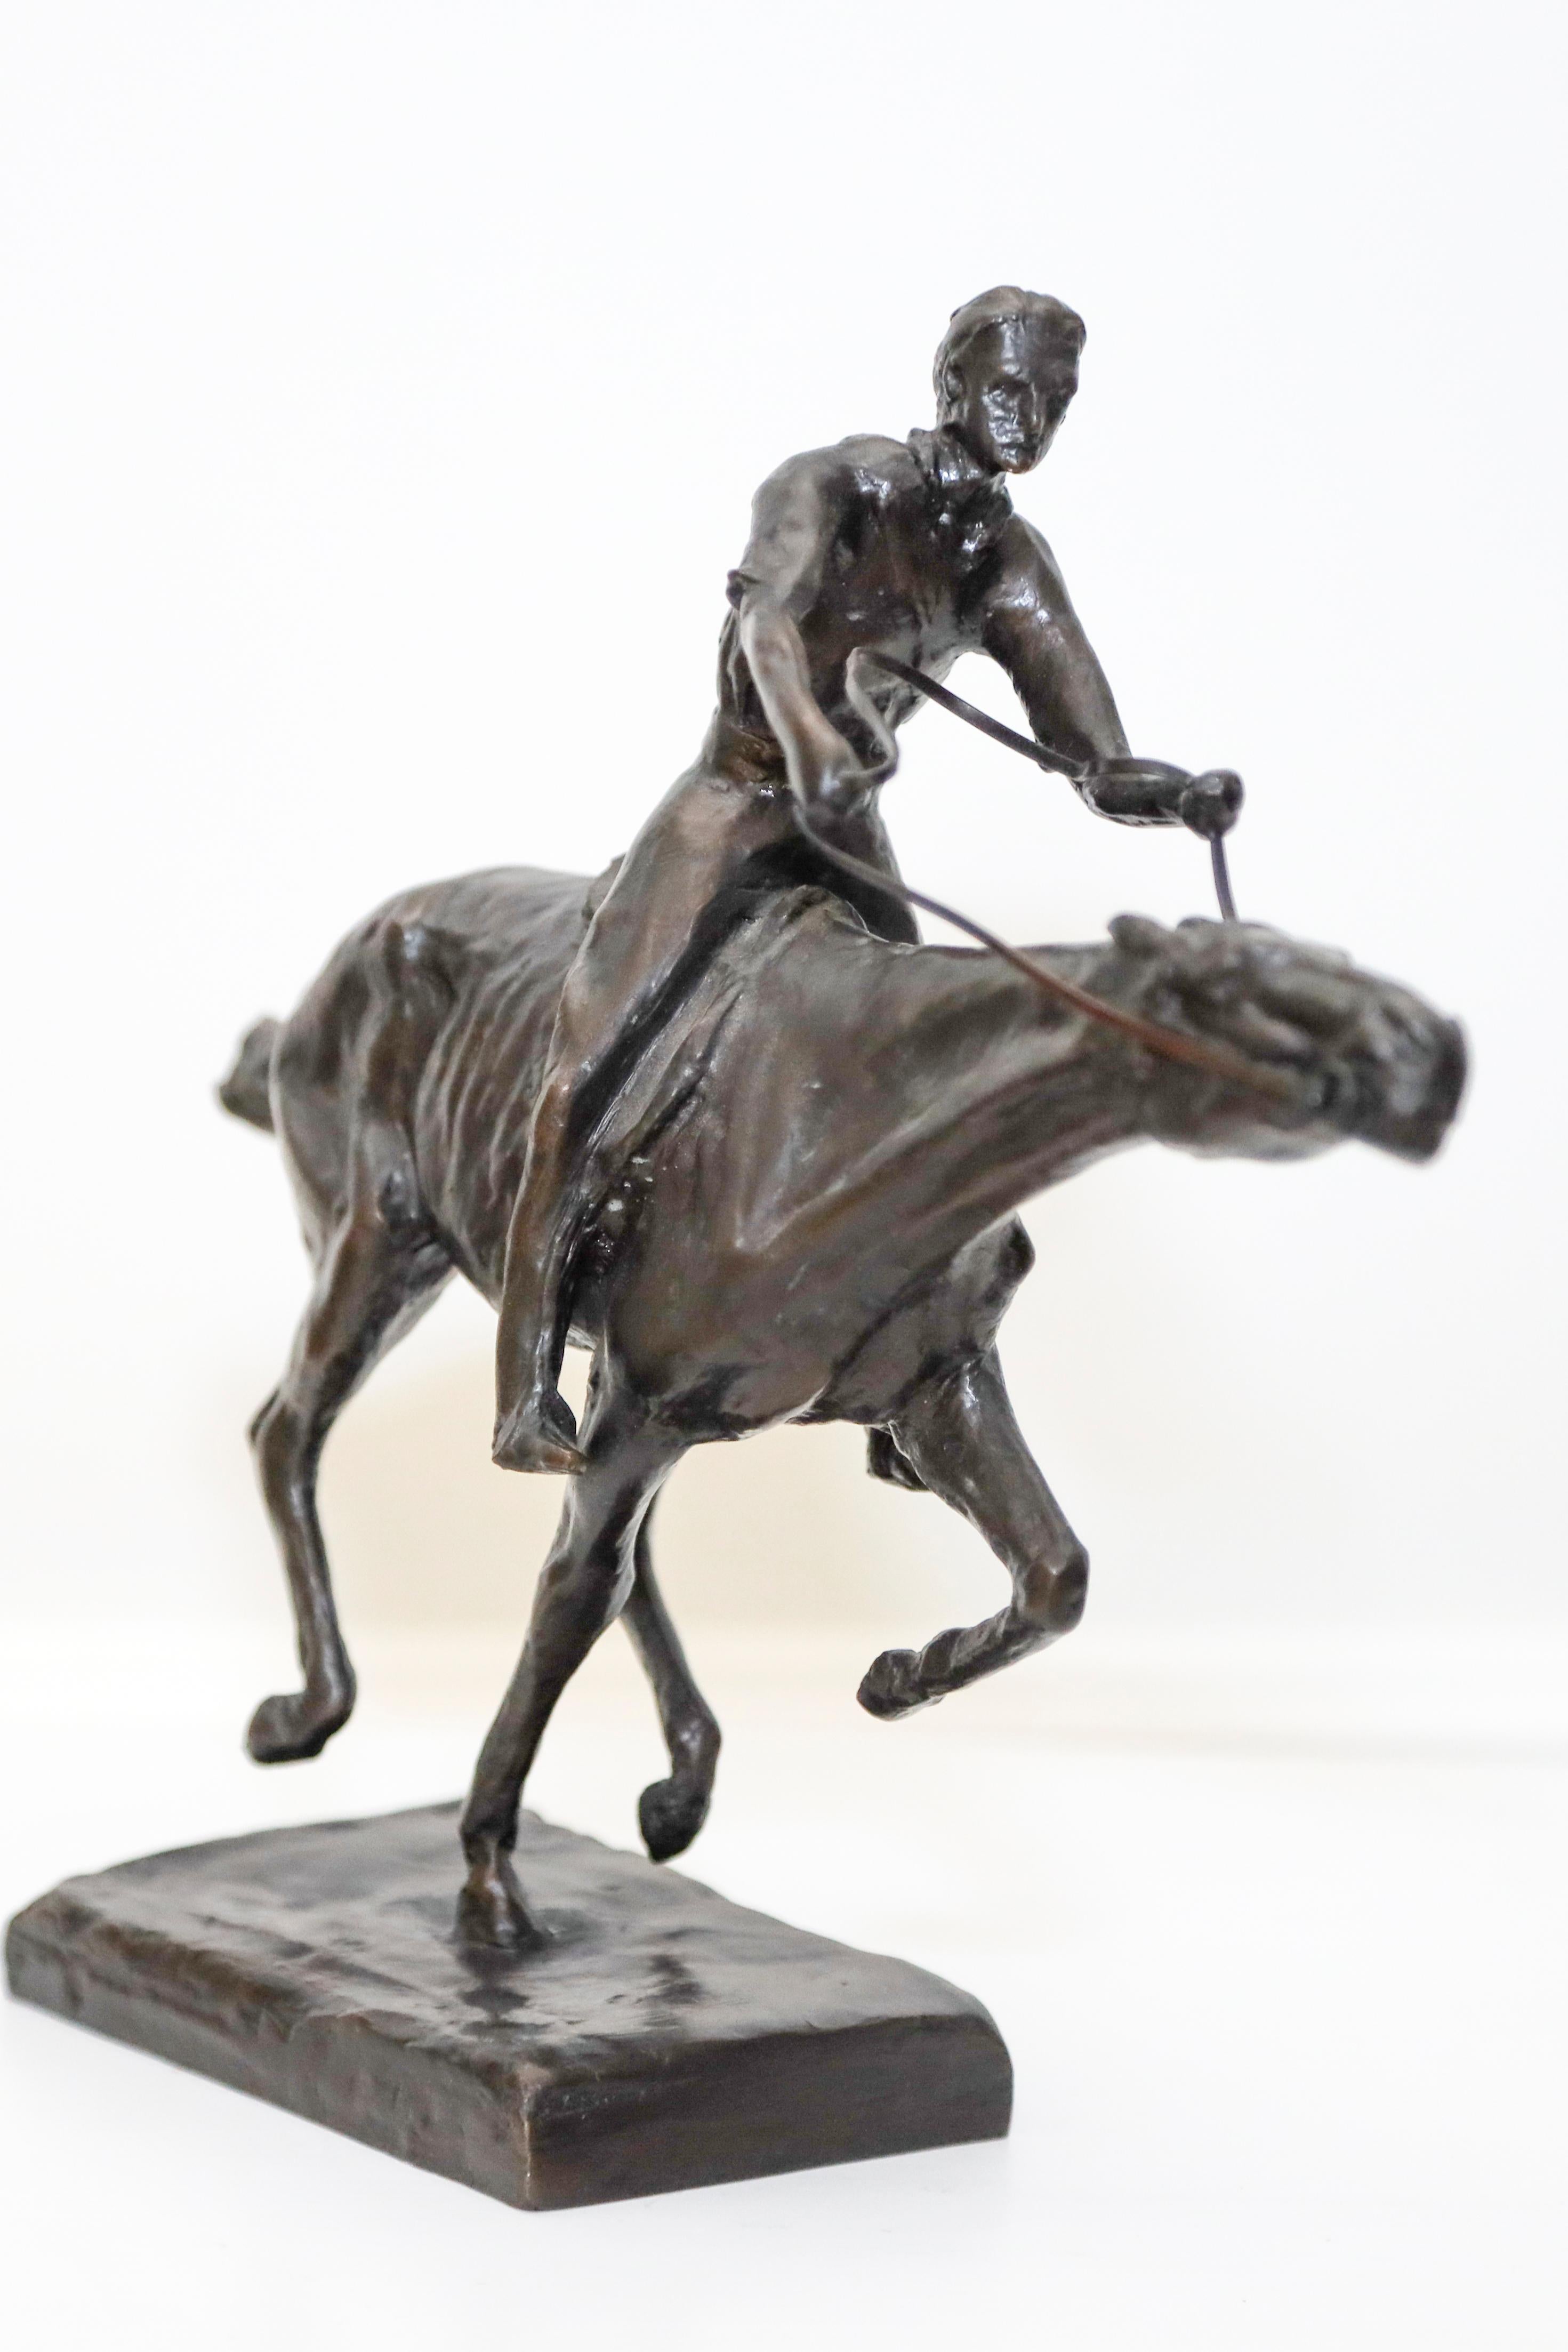 Rumsey’s specialties included equestrian sculptures – portraits of polo players and prize horses, as well as of cowboys, cattle and horses as metaphors. He worked principally in bronze and stone, often employing mythology and historical themes